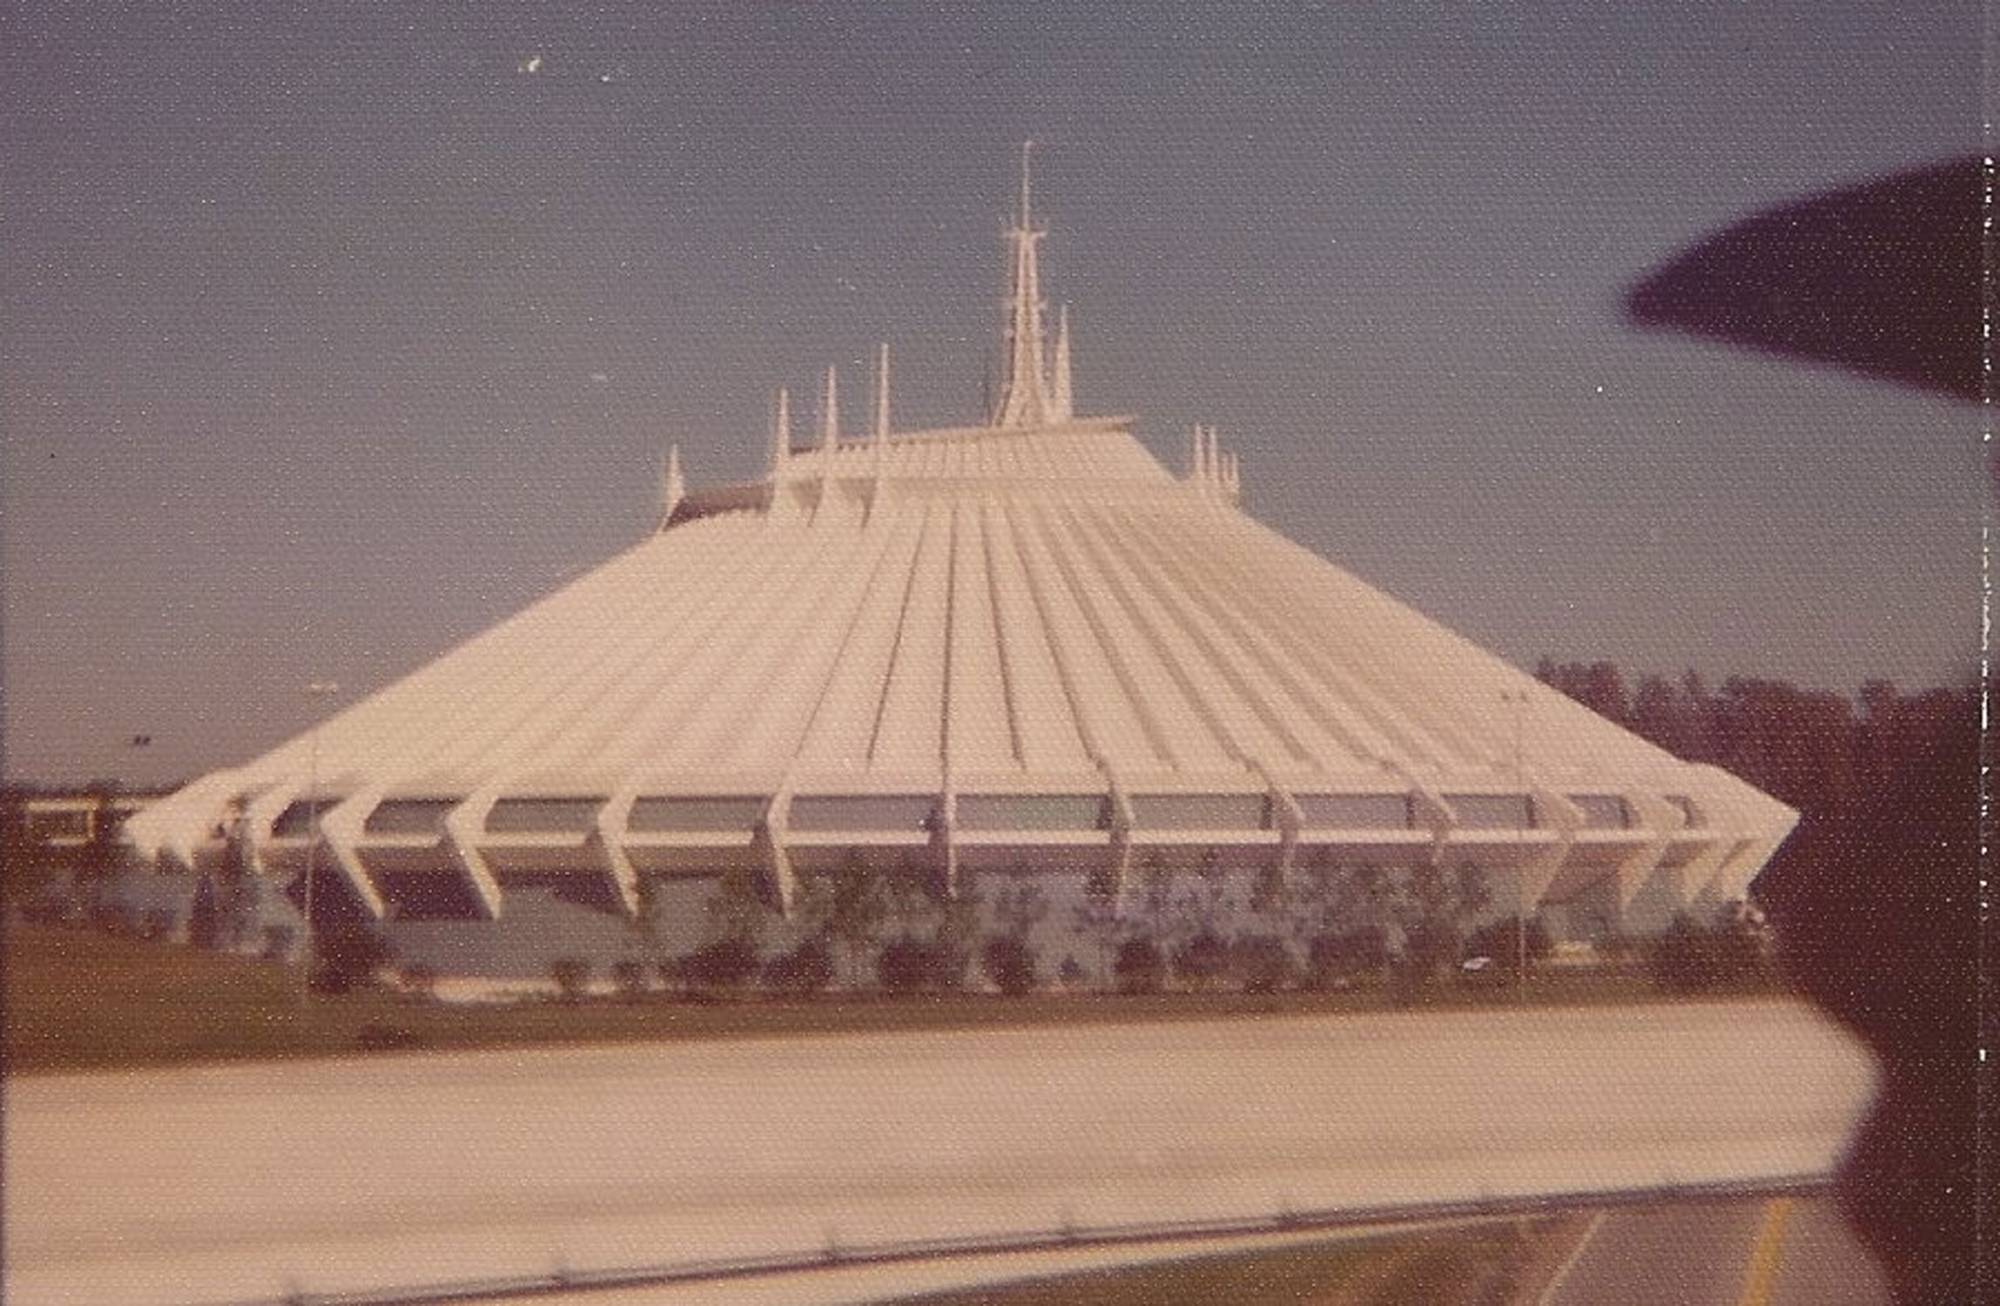 Space Mountain in 1975